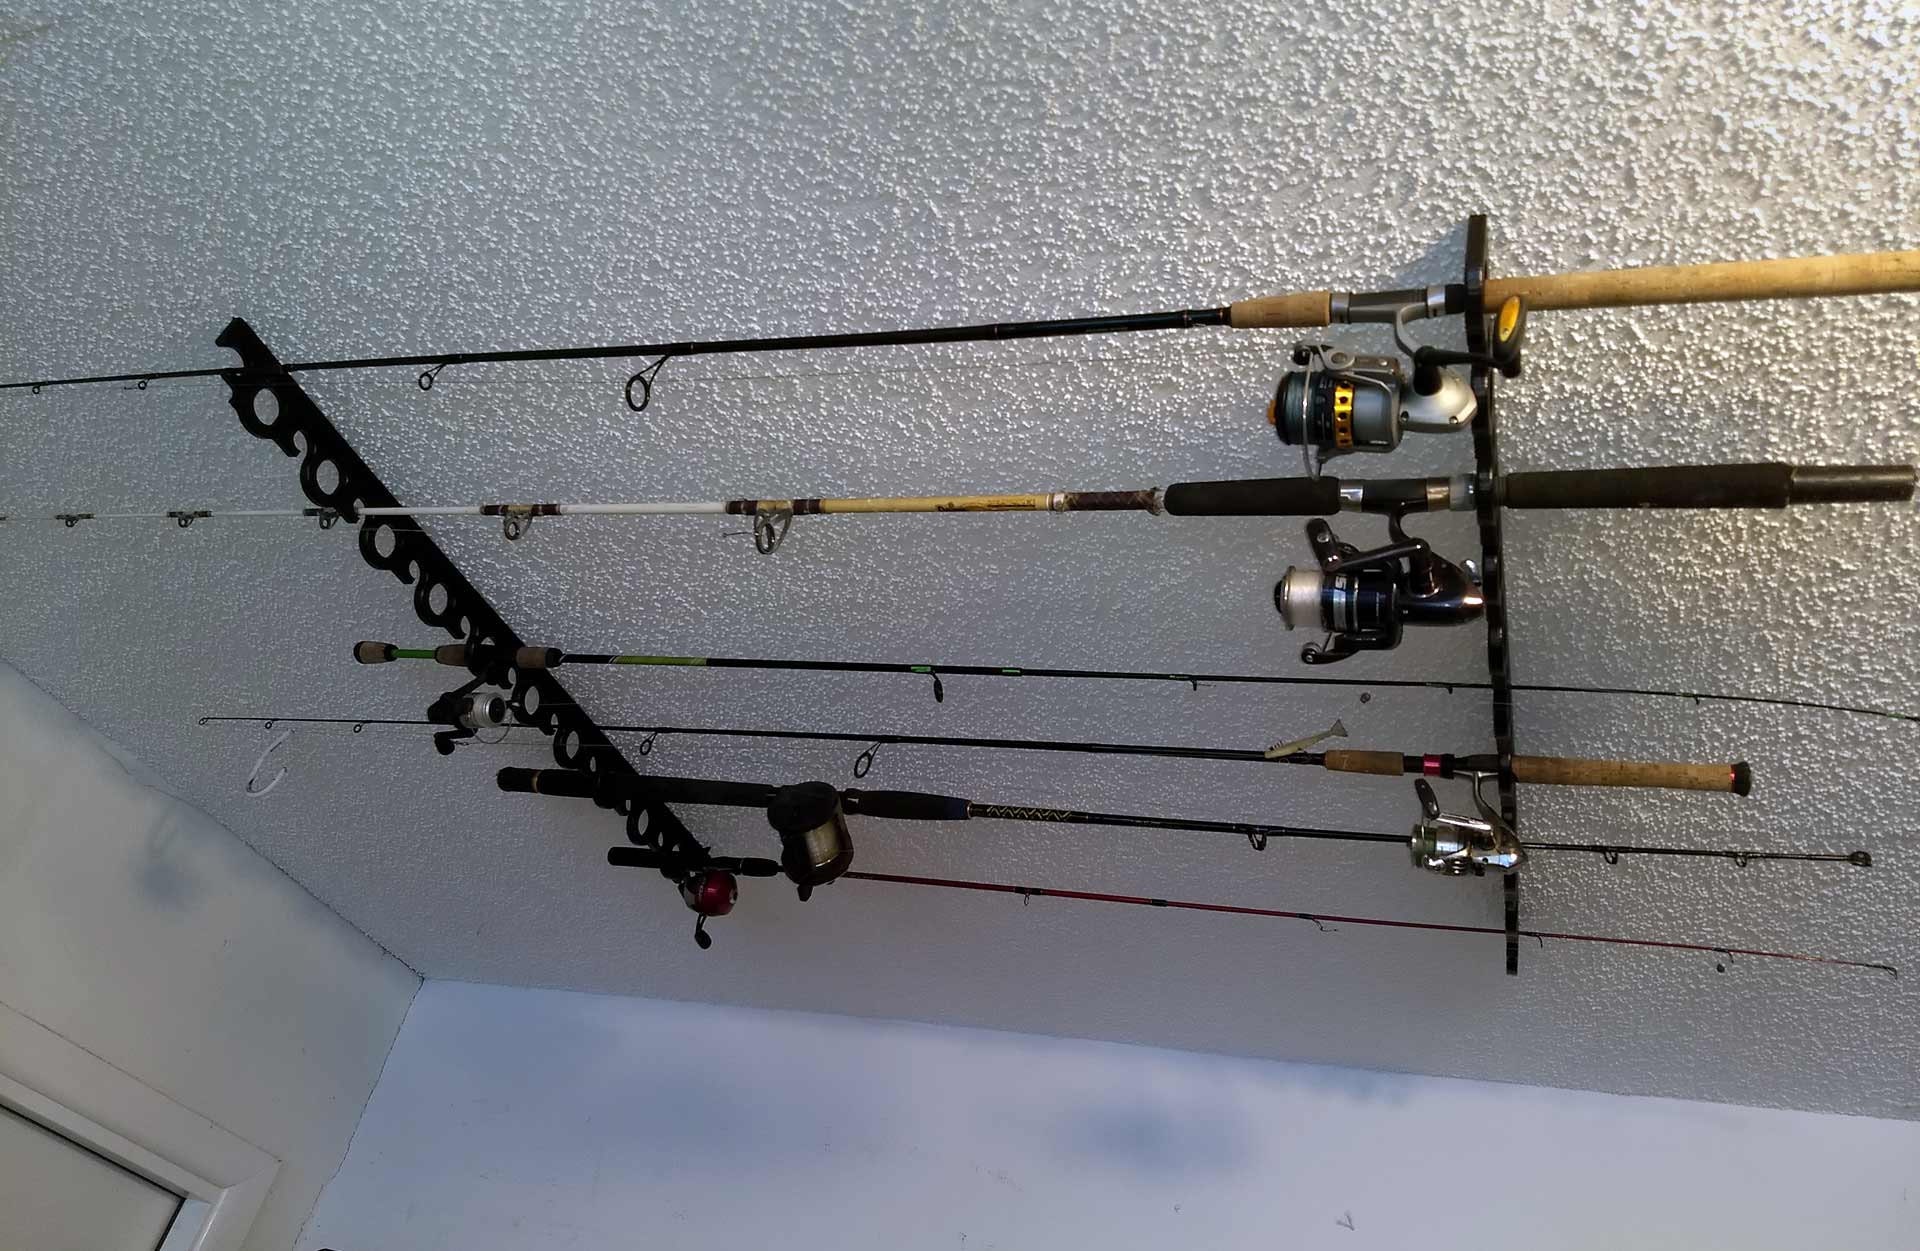 A Pair Fishing Rod Rack For 10 Rods Storage Pole Rod Holder Suit Ceiling  Wall Mount Garage Organizer Fishing Rod Accessories - AliExpress